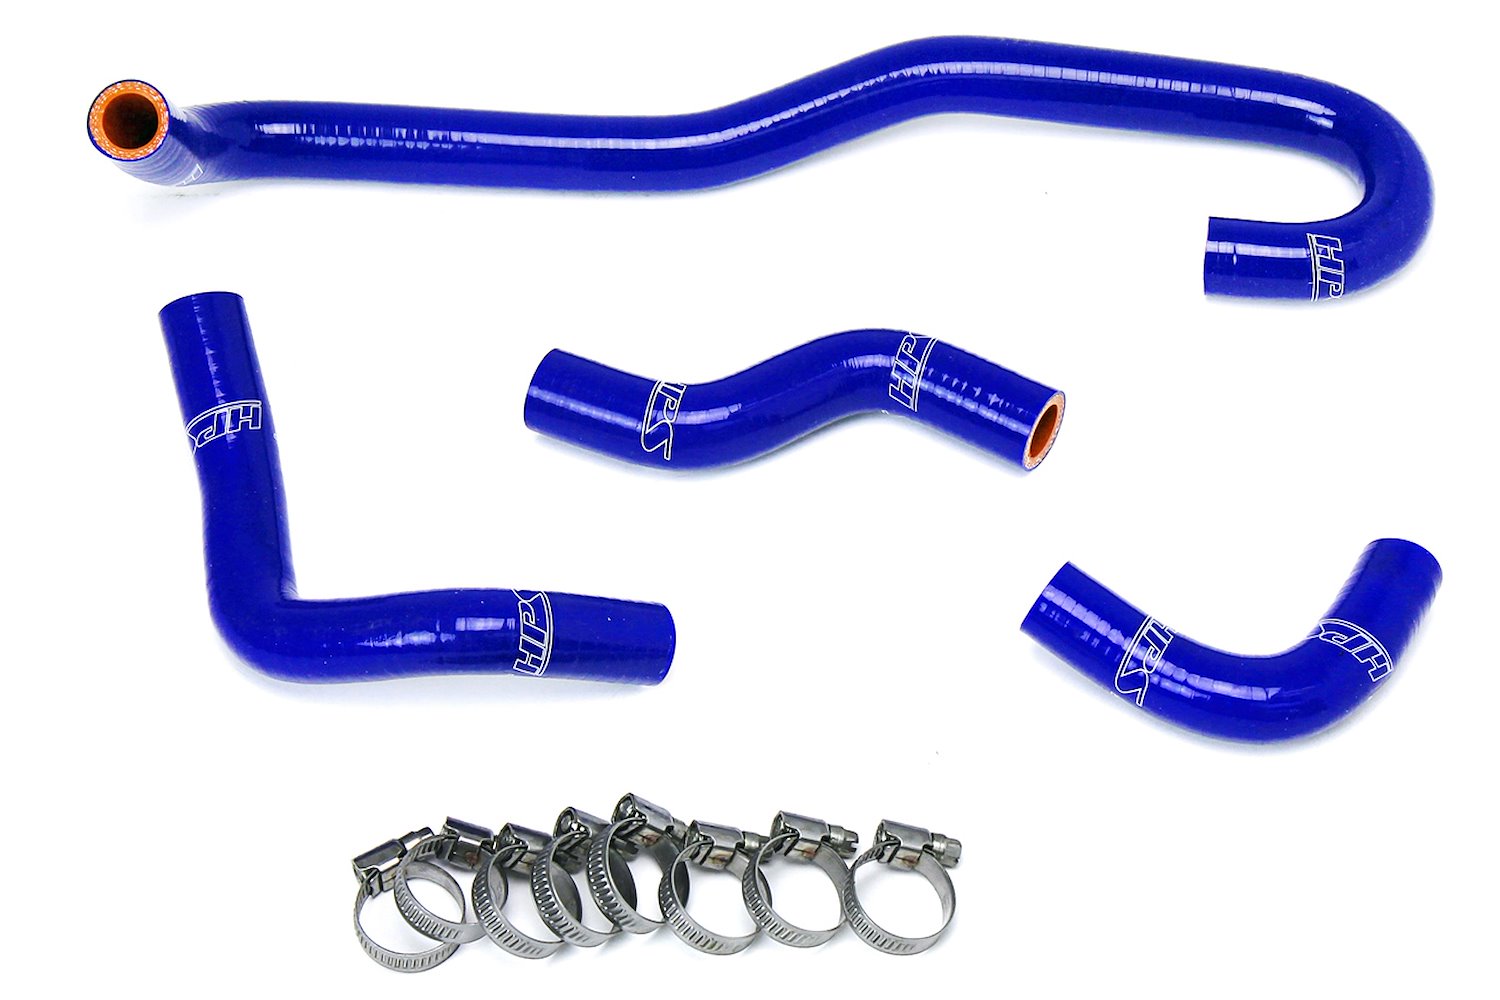 57-1655-BLUE Heater Hose Kit, High-Temp 3-Ply Reinforced Silicone, Replace OEM Rubber Heater Coolant Hoses